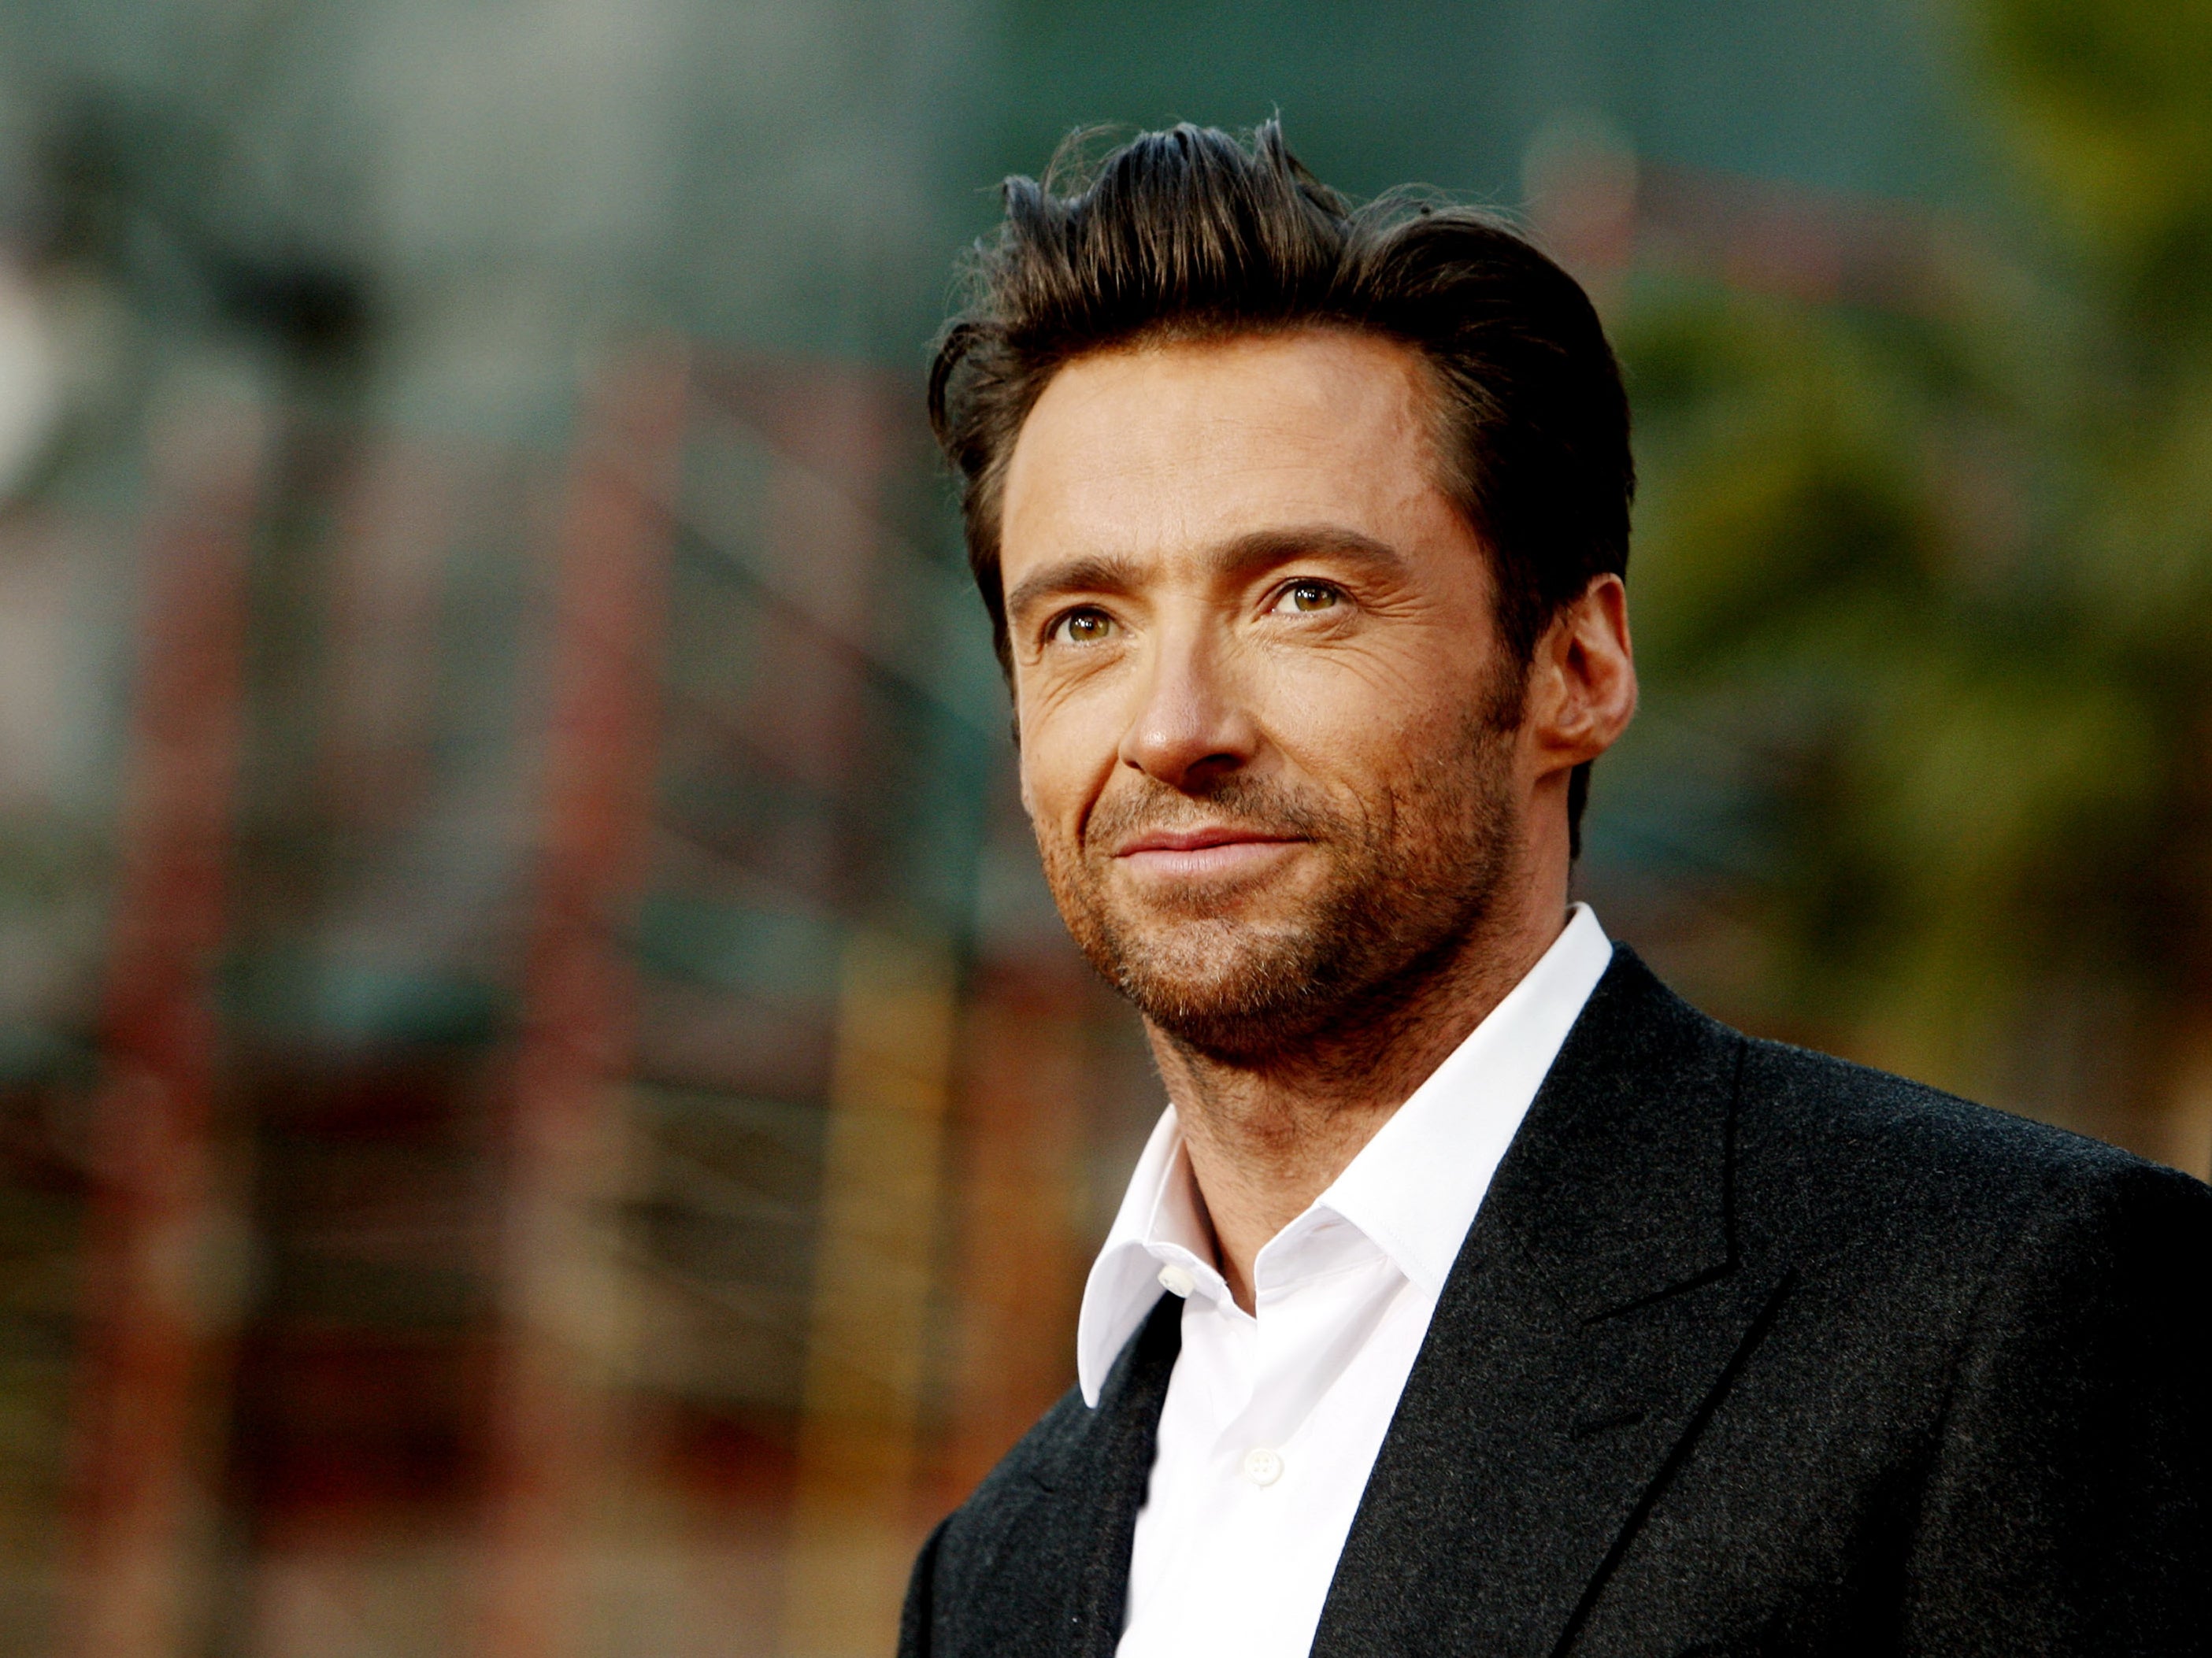 Jackman turned down the role of James Bond